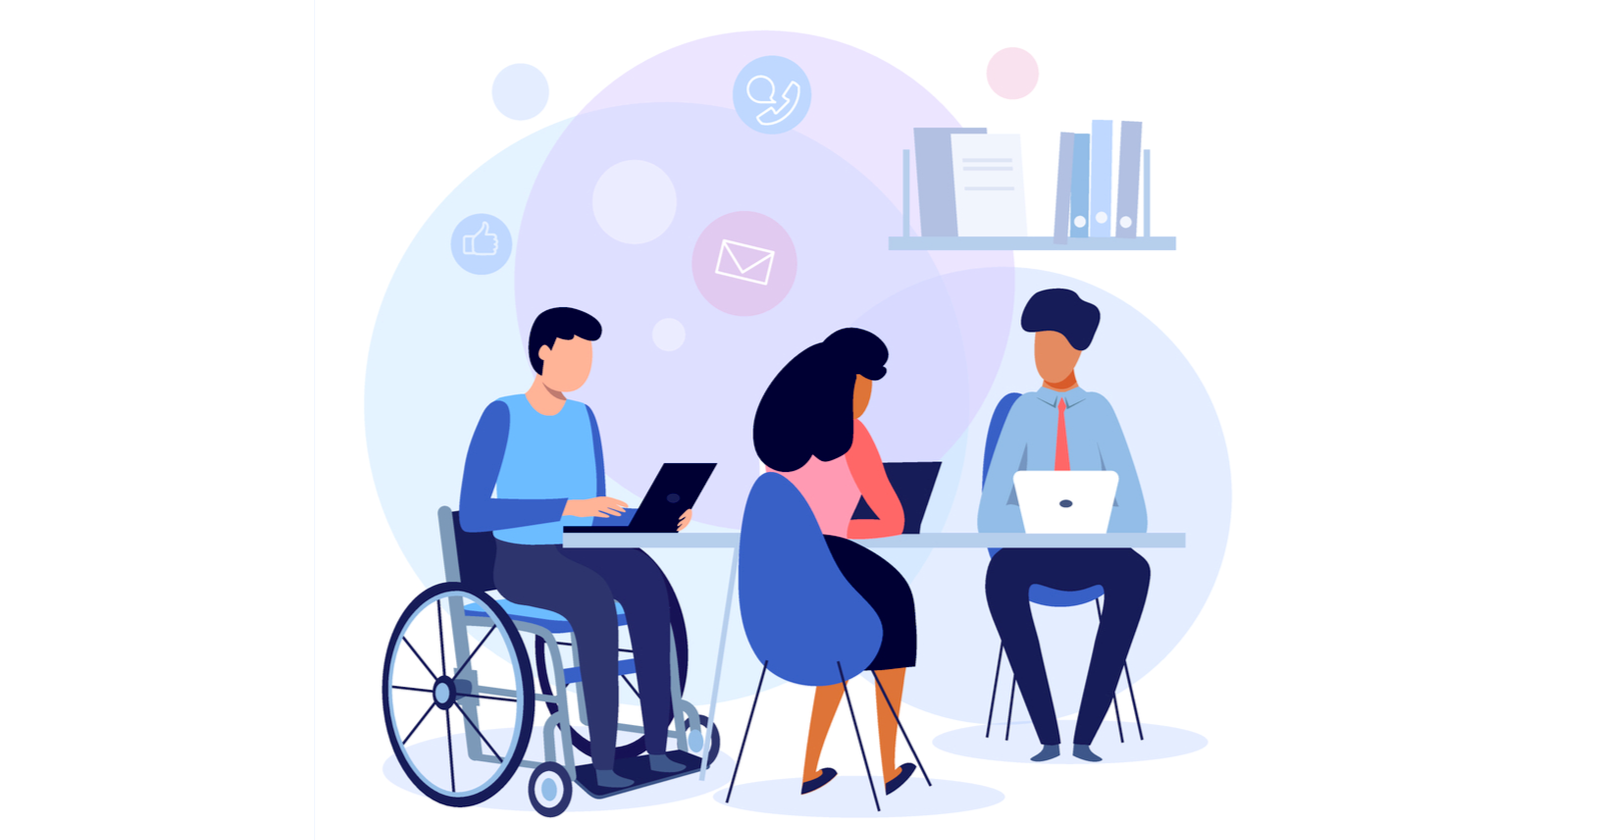 Tips for Accessibility, Search and Human Experience Design